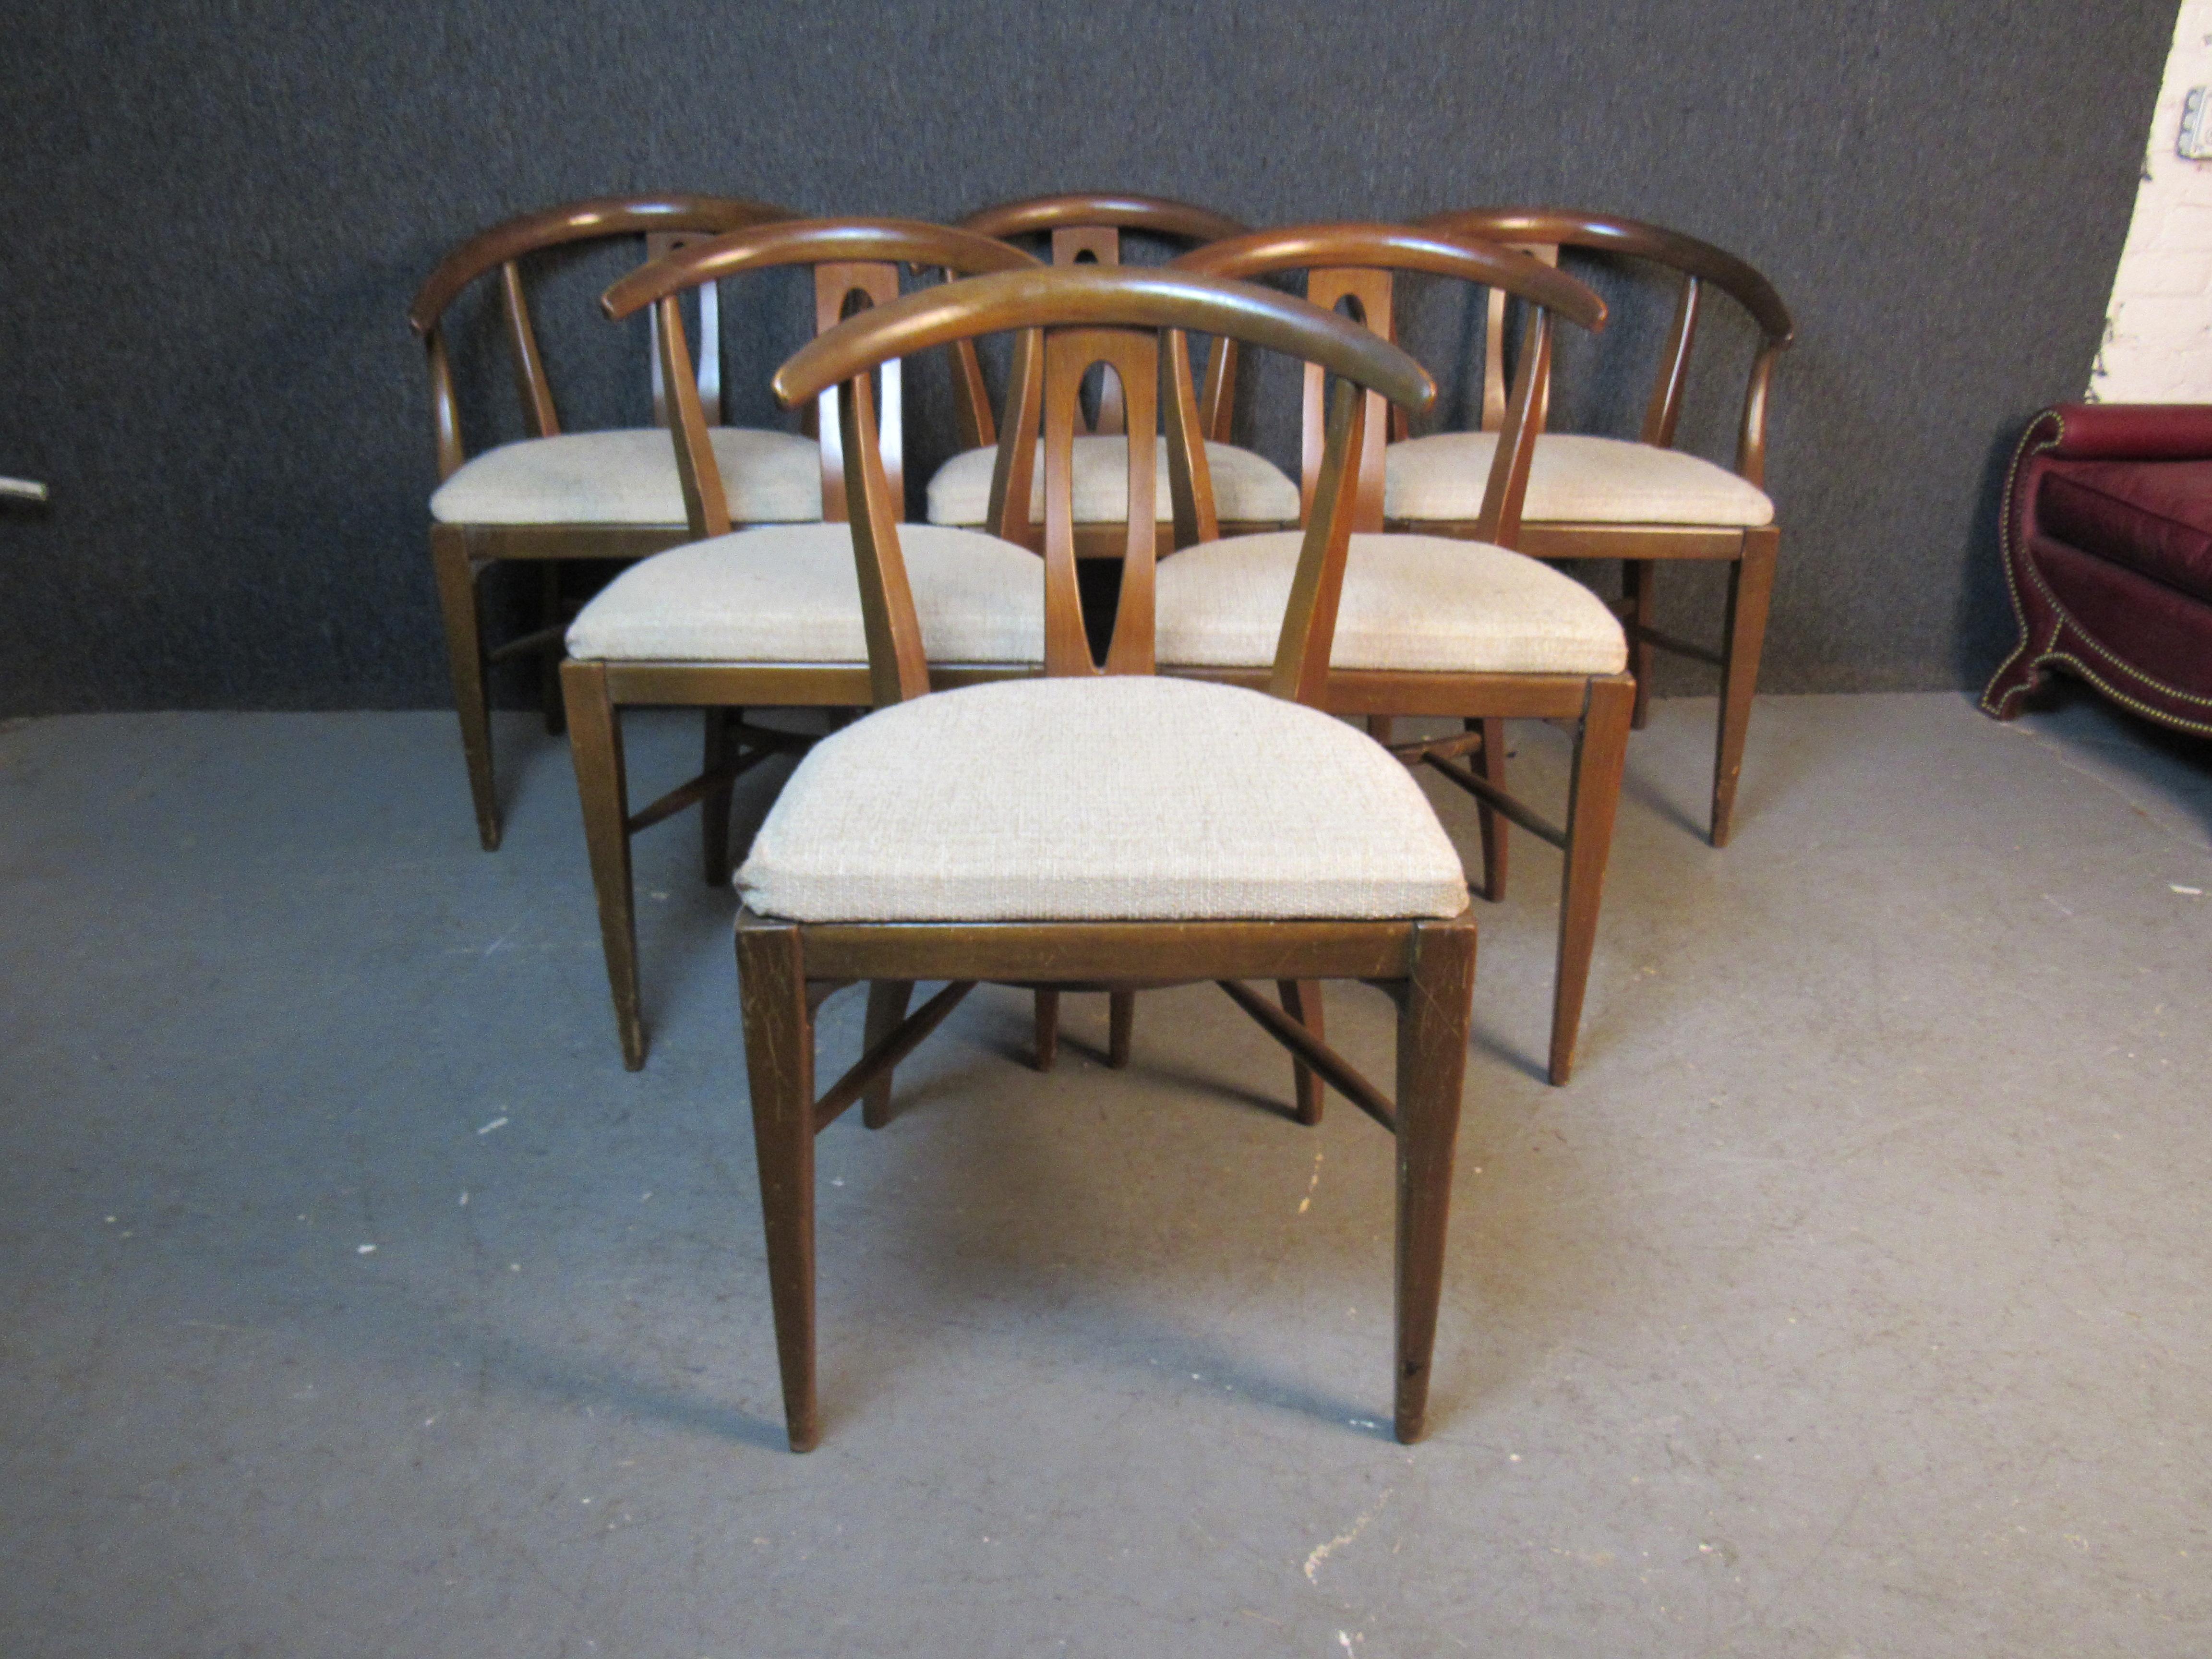 Bring home the best of both worlds with this wonderful set of 6 mid-century vintage dining chairs! Made by the respected craftsmen of North Carolina's Blowing Rock Furniture of solid North American hardwoods in a classic Scandinavian modern style,